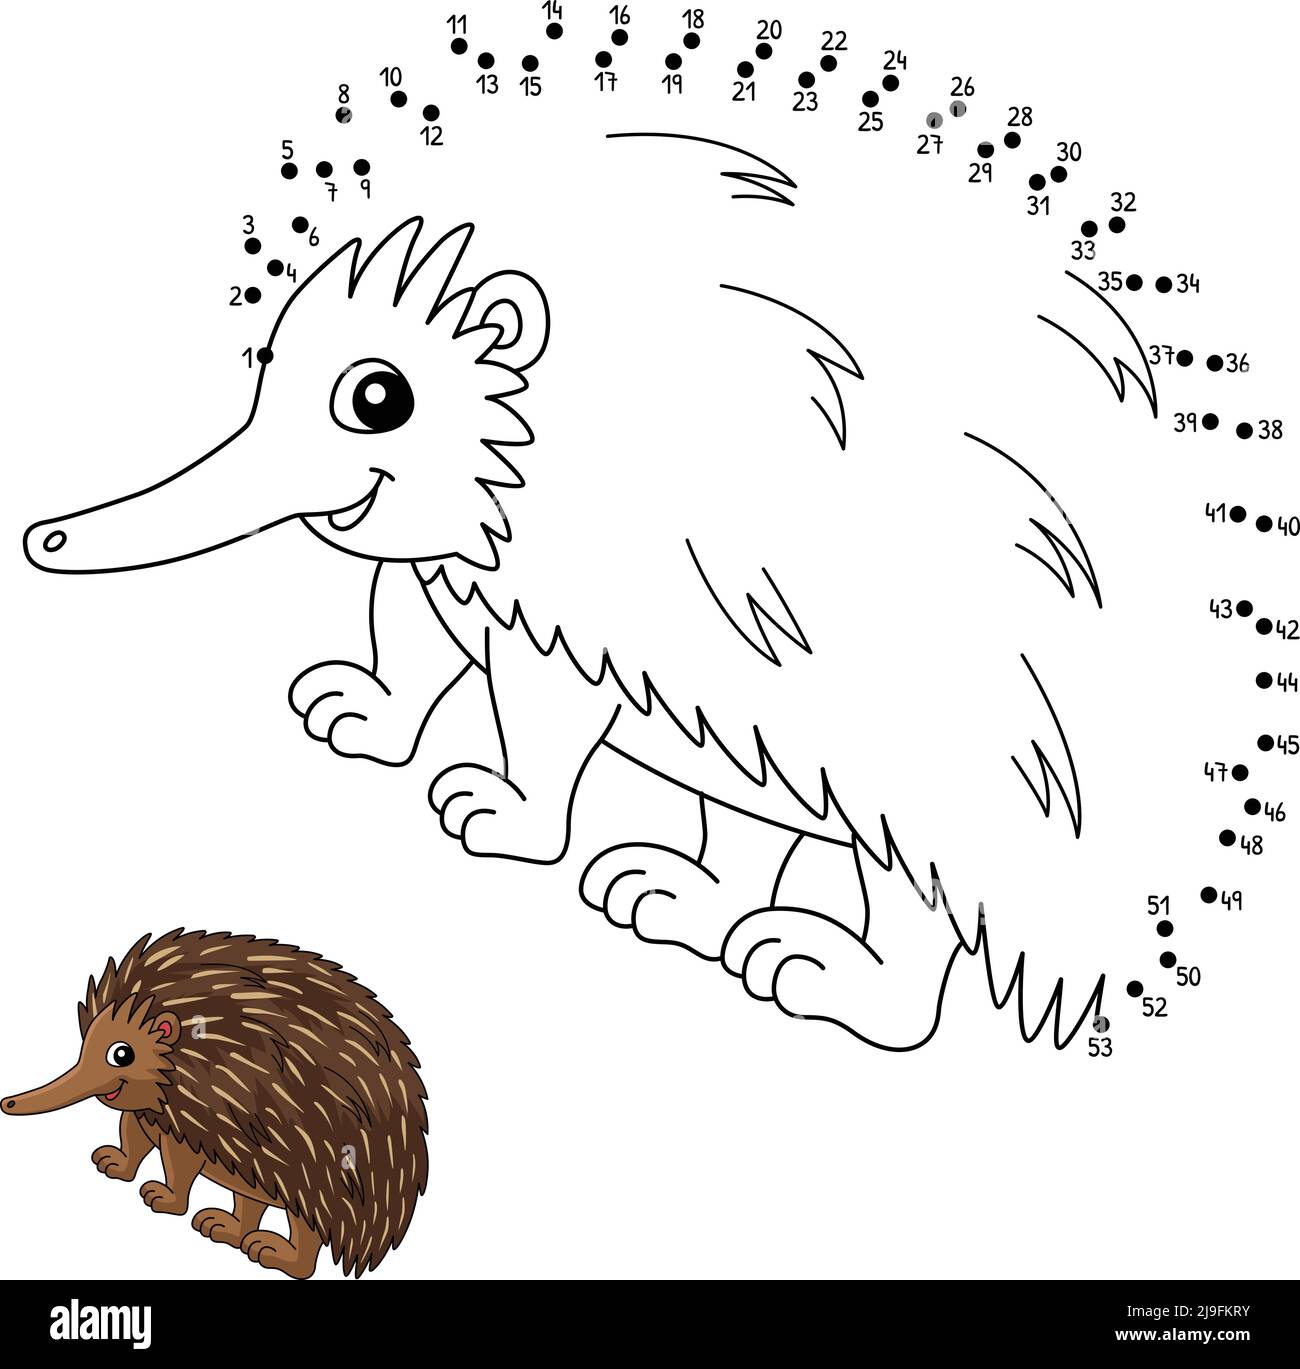 Dot to Dot Echidna Animal Coloring Page for Kids Stock Vector